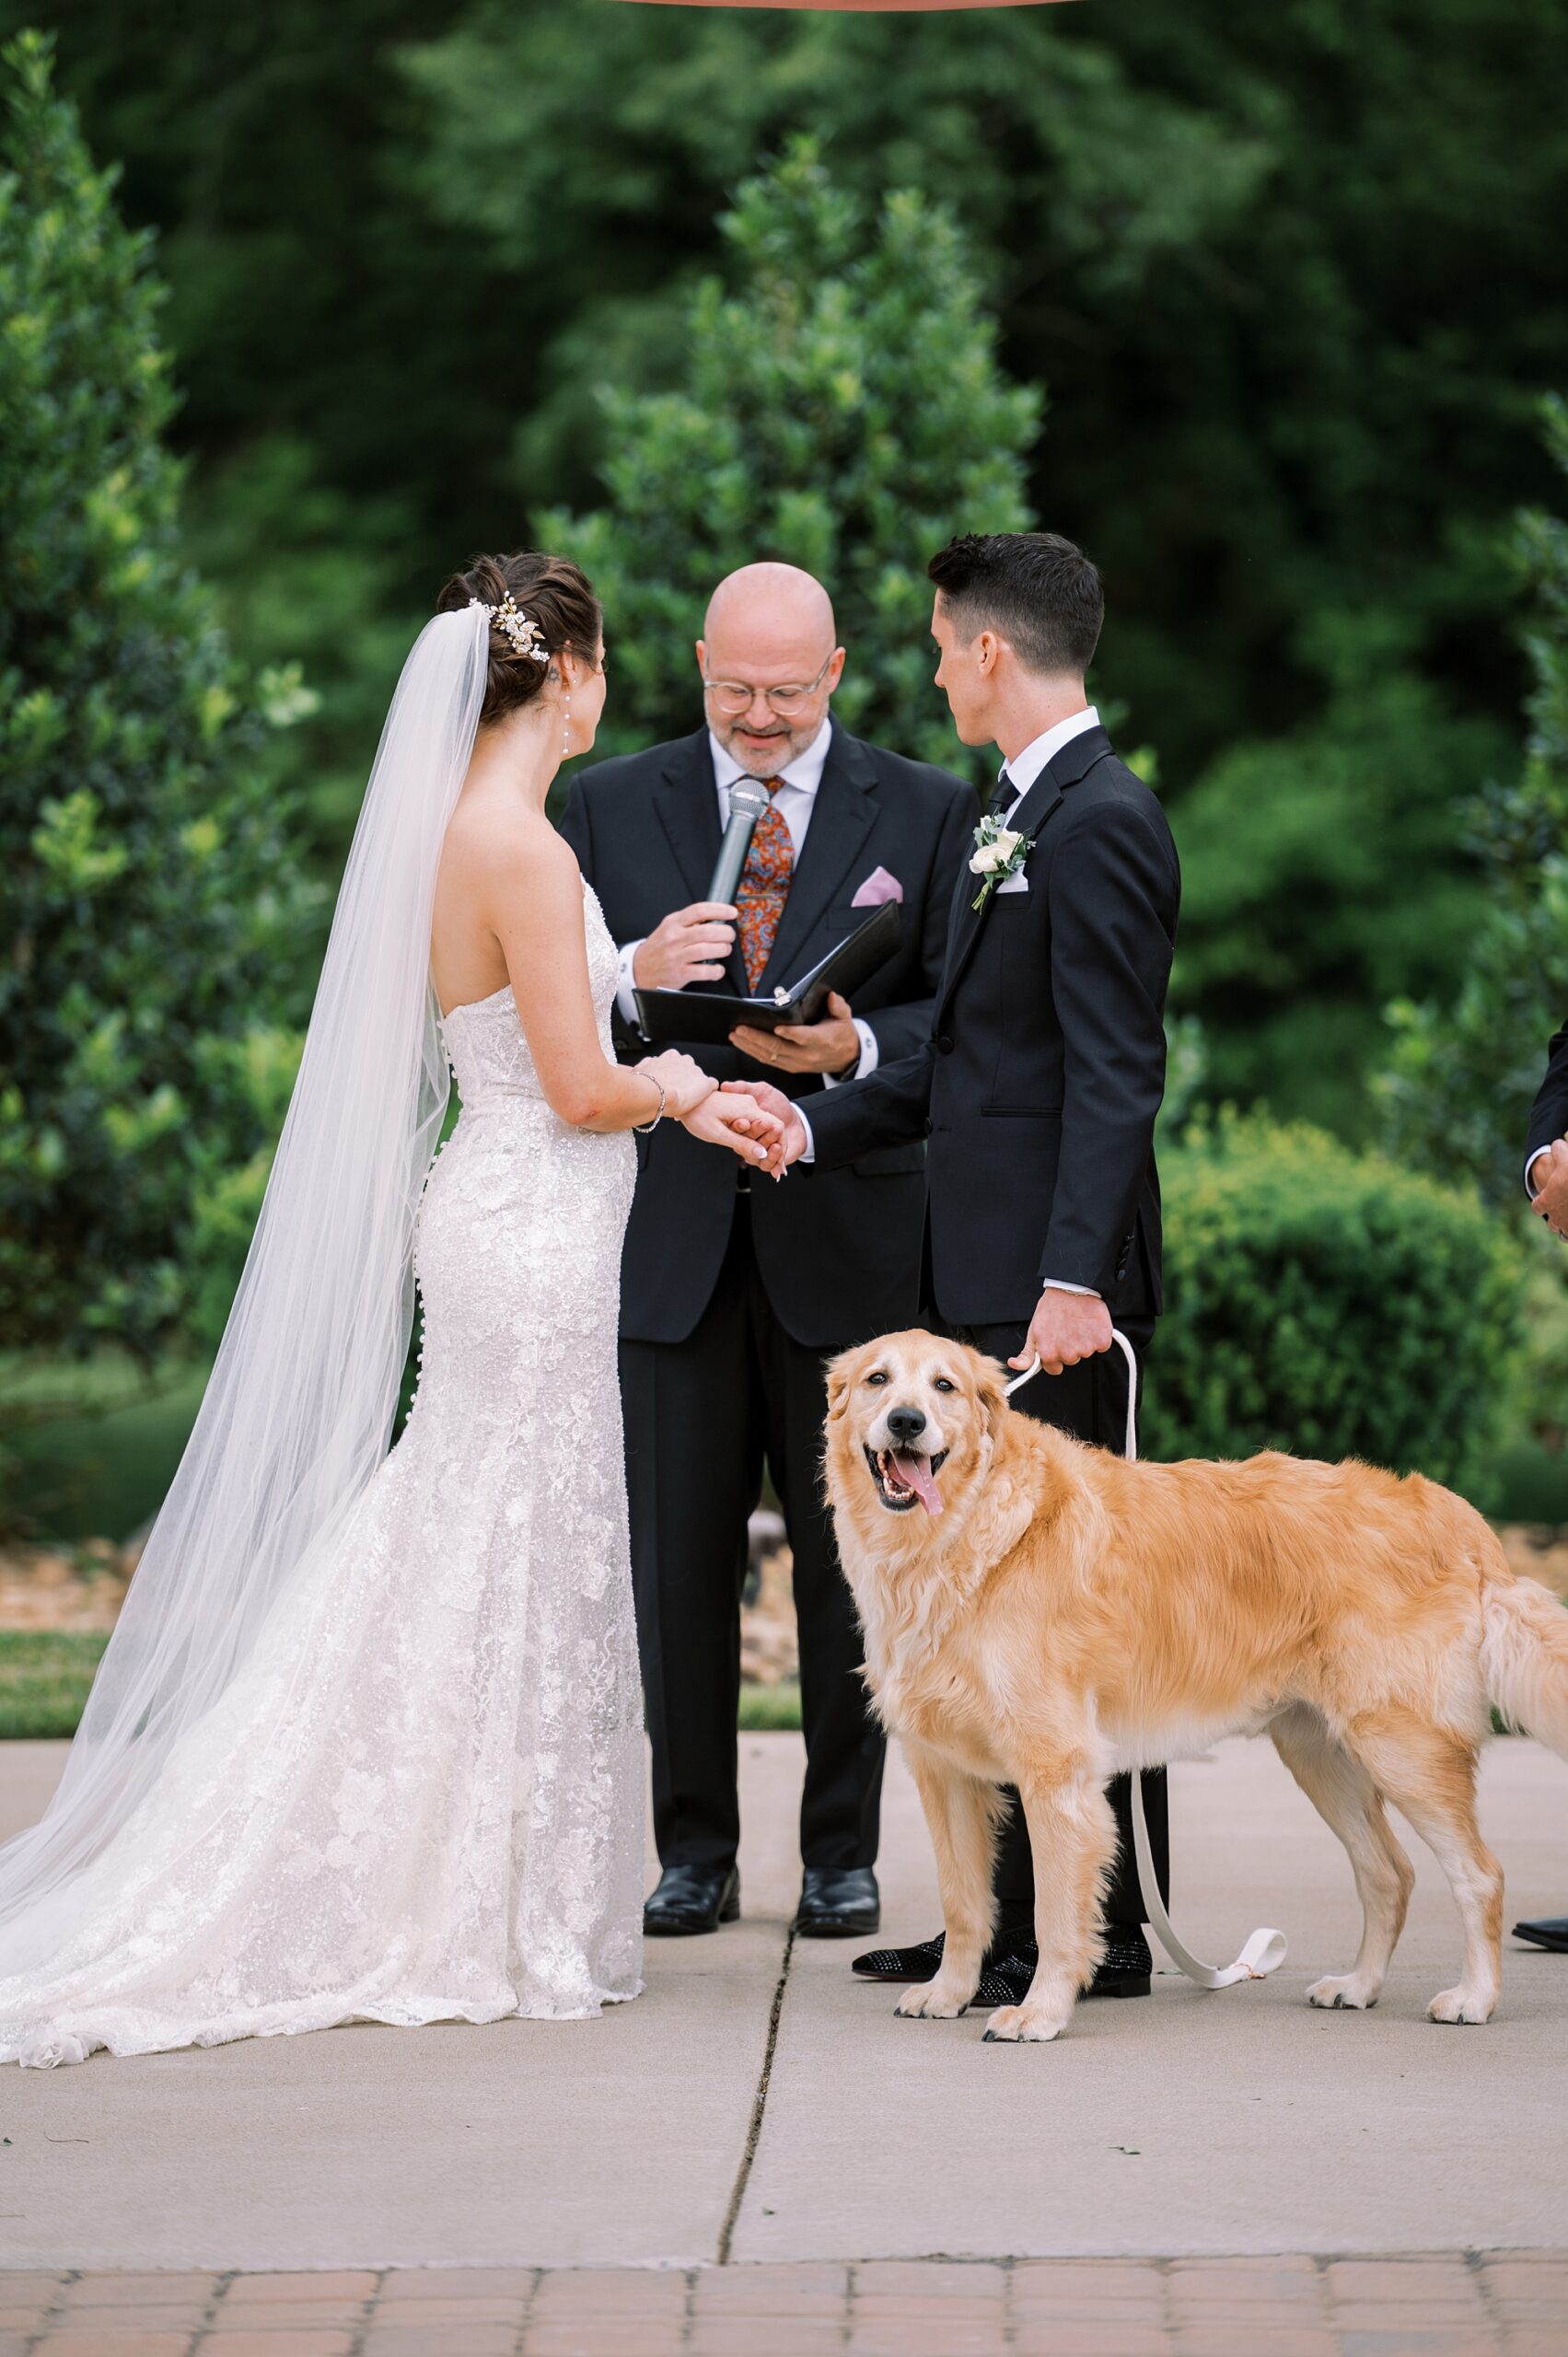 couple exchange vows with their dog next to them